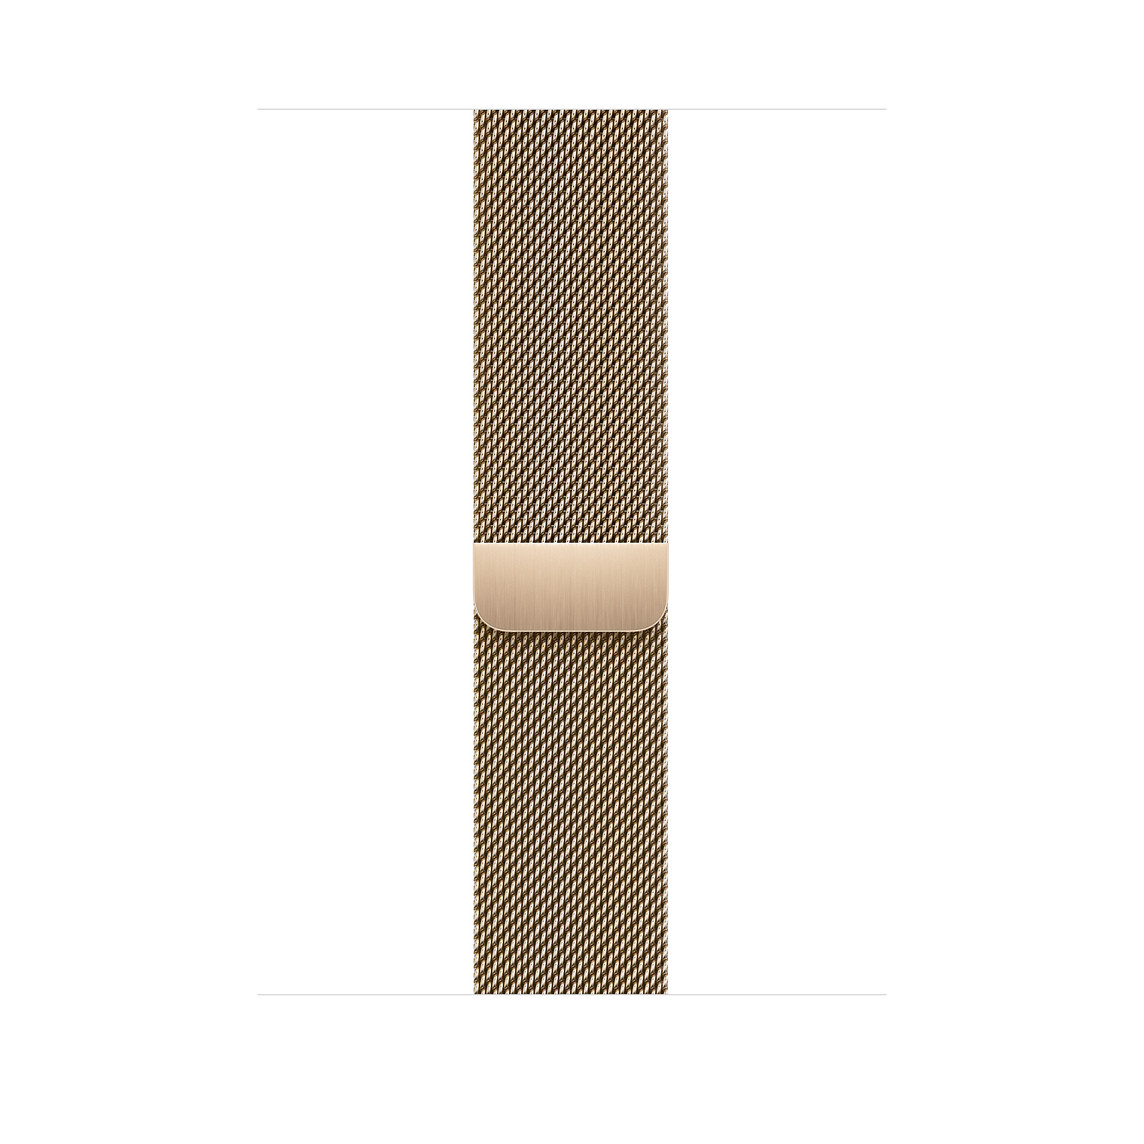 Gold Milanese Loop band, polished stainless steel mesh with magnetic closure